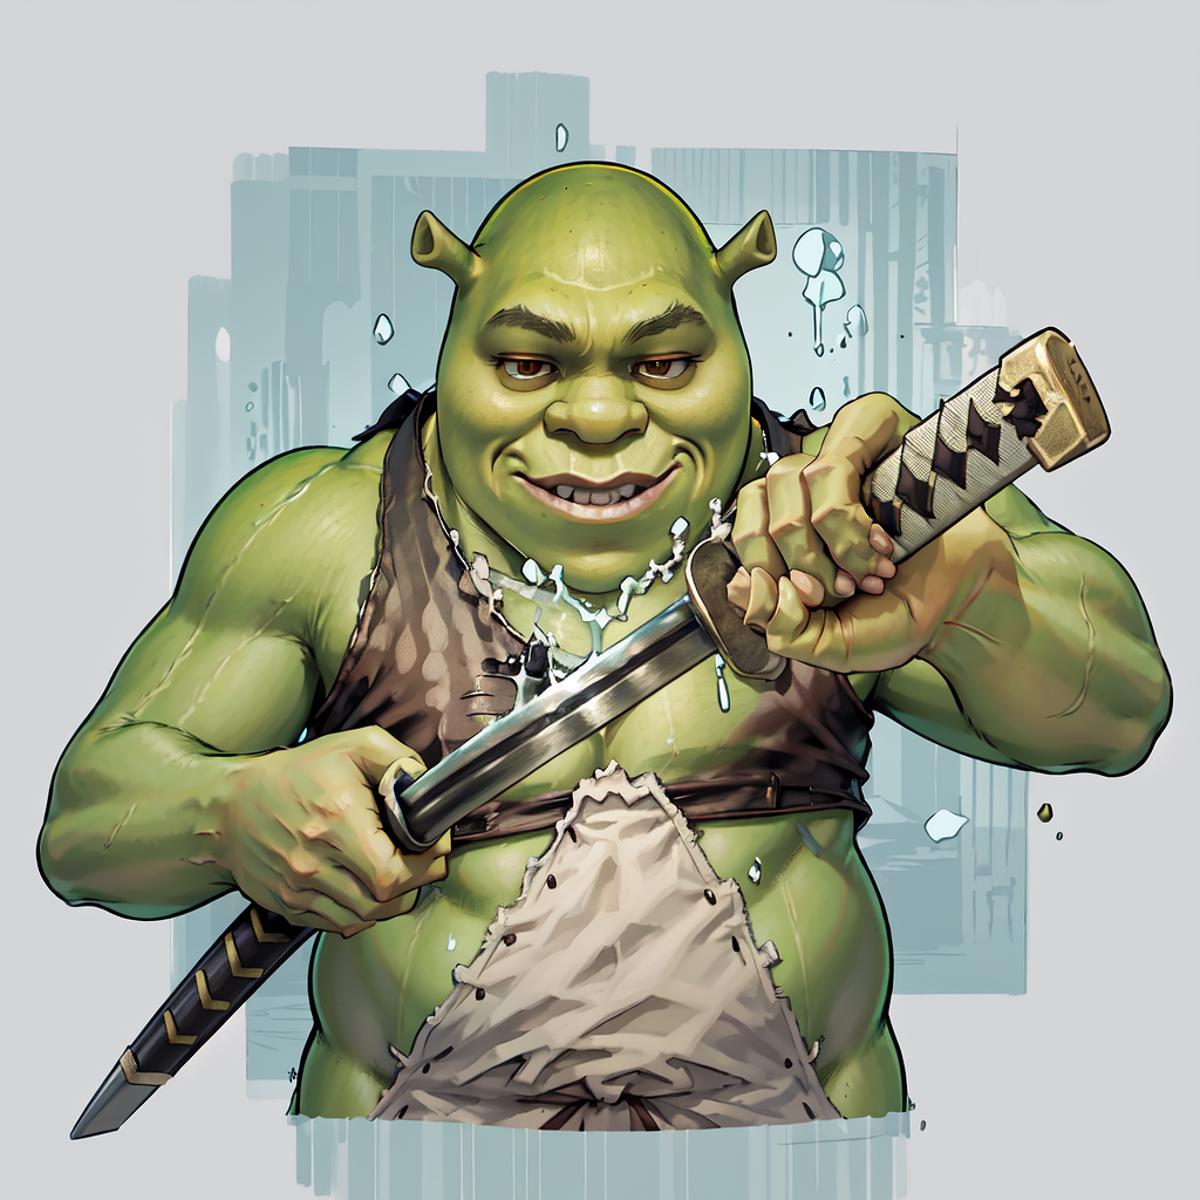 A Shirtless Shrek Holds a Sword, Smiling and Wet.